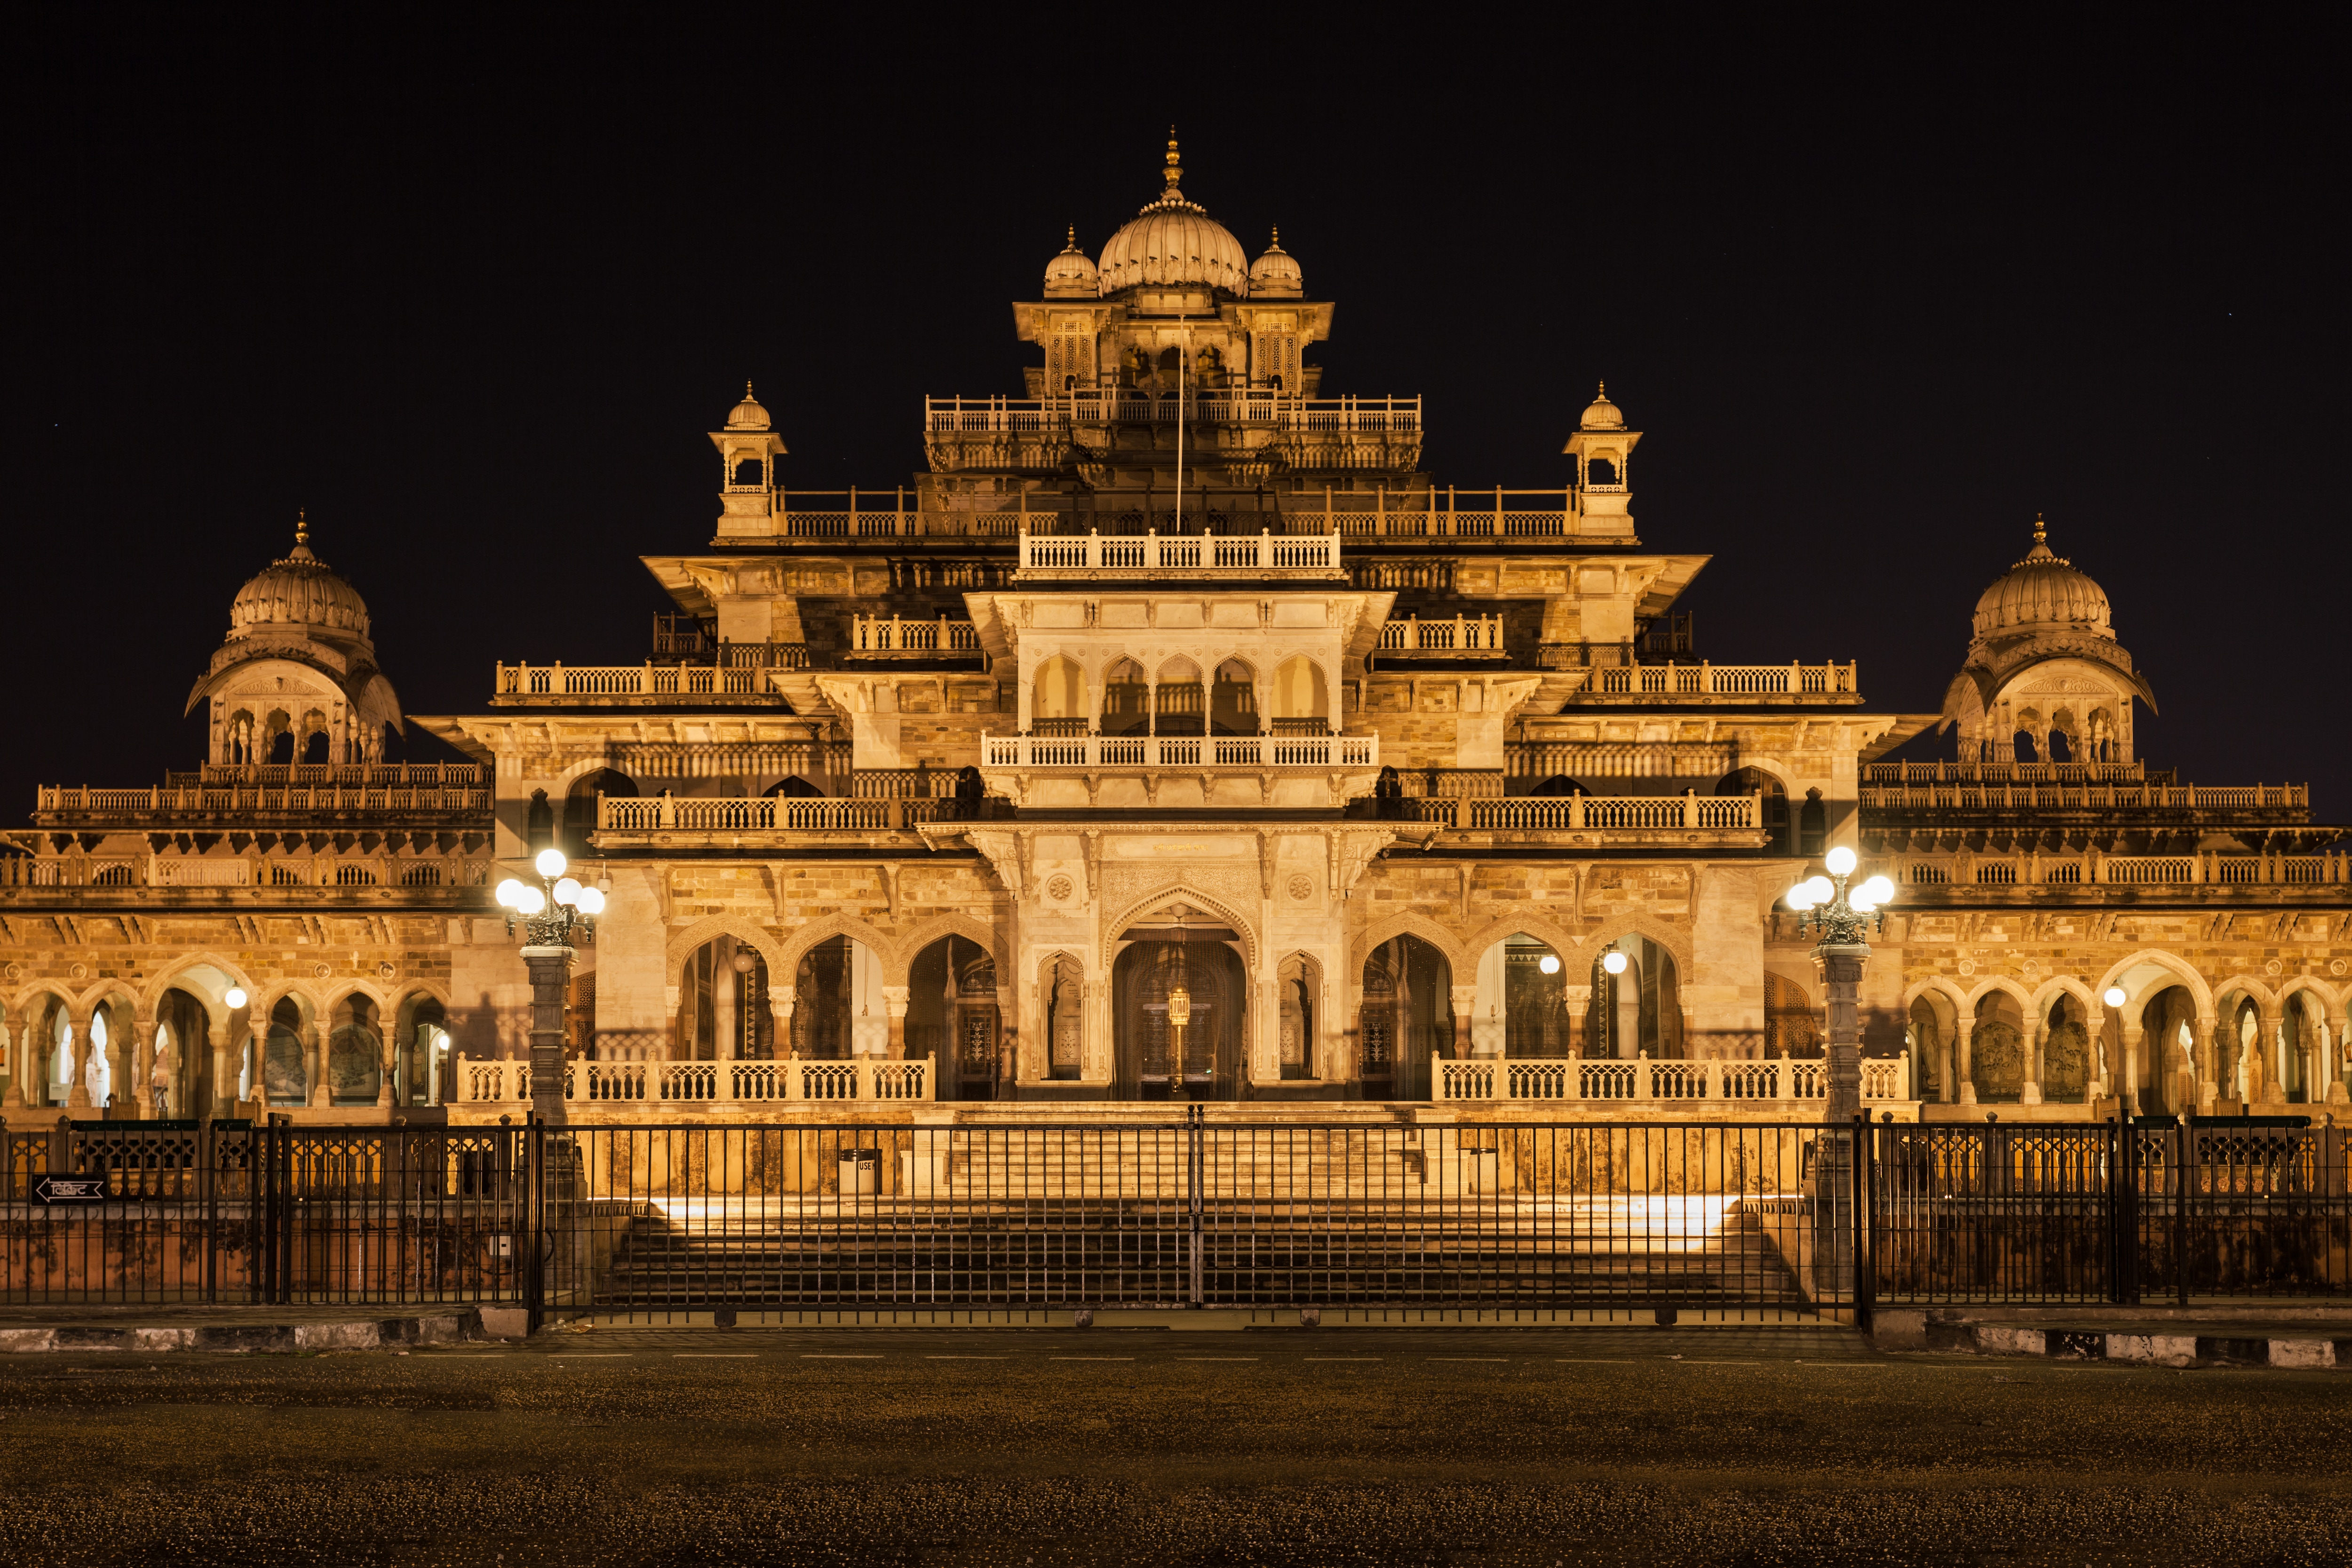 Albert Hall Museum - One of the Top Attractions in Jaipur, India